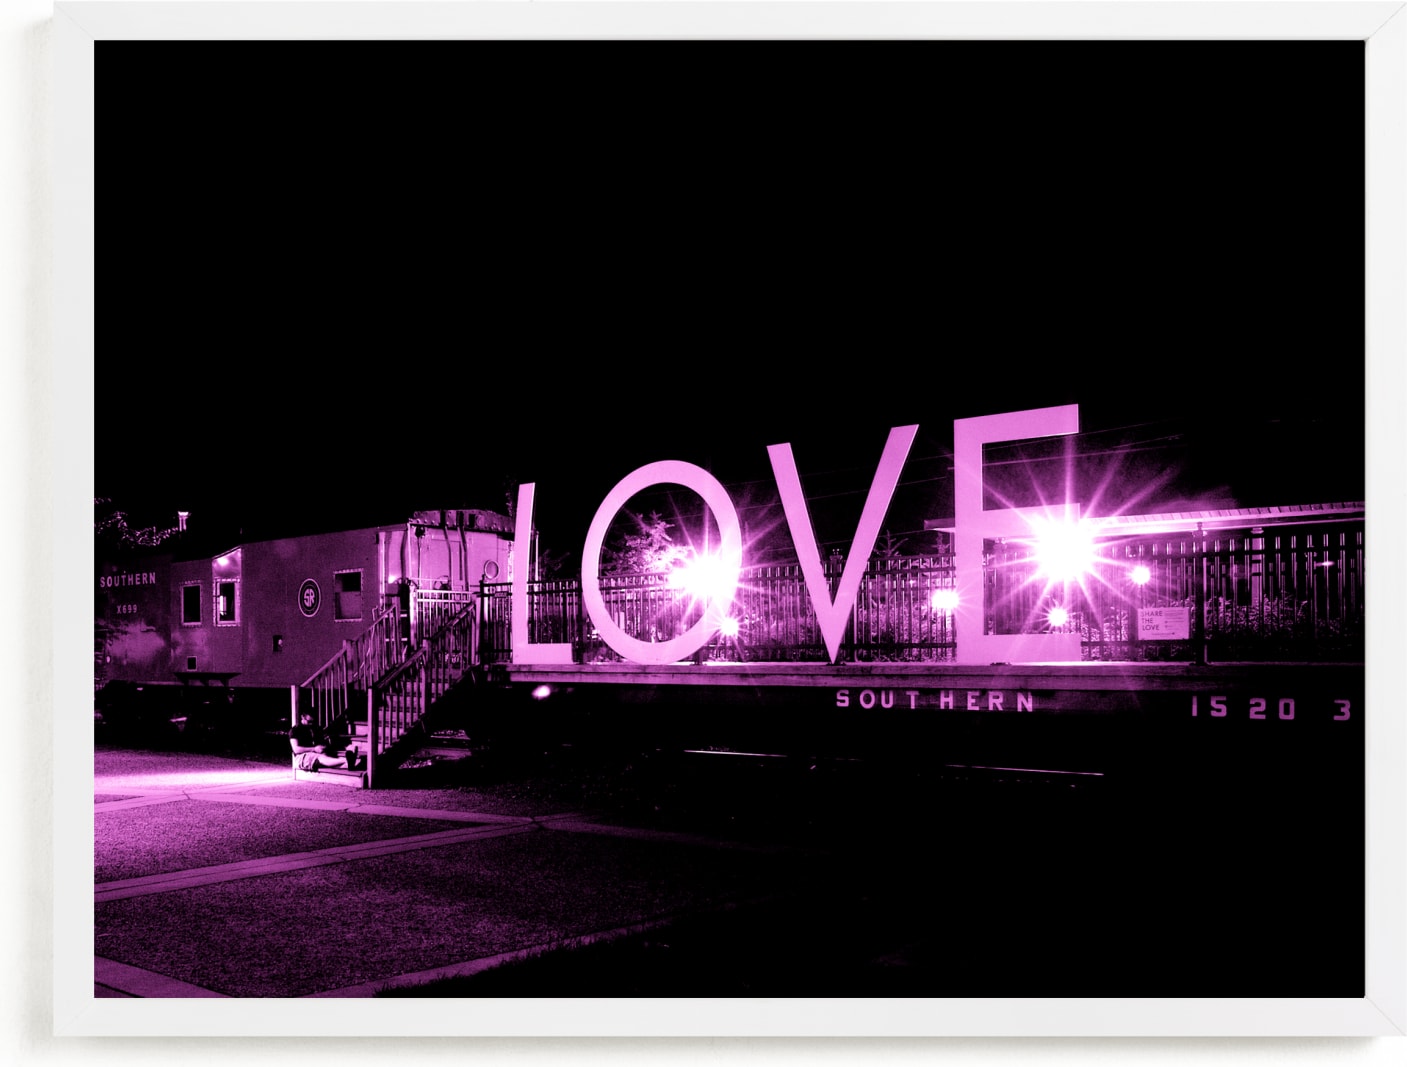 This is a purple art by AMANDA LOMAX called Lovelight.